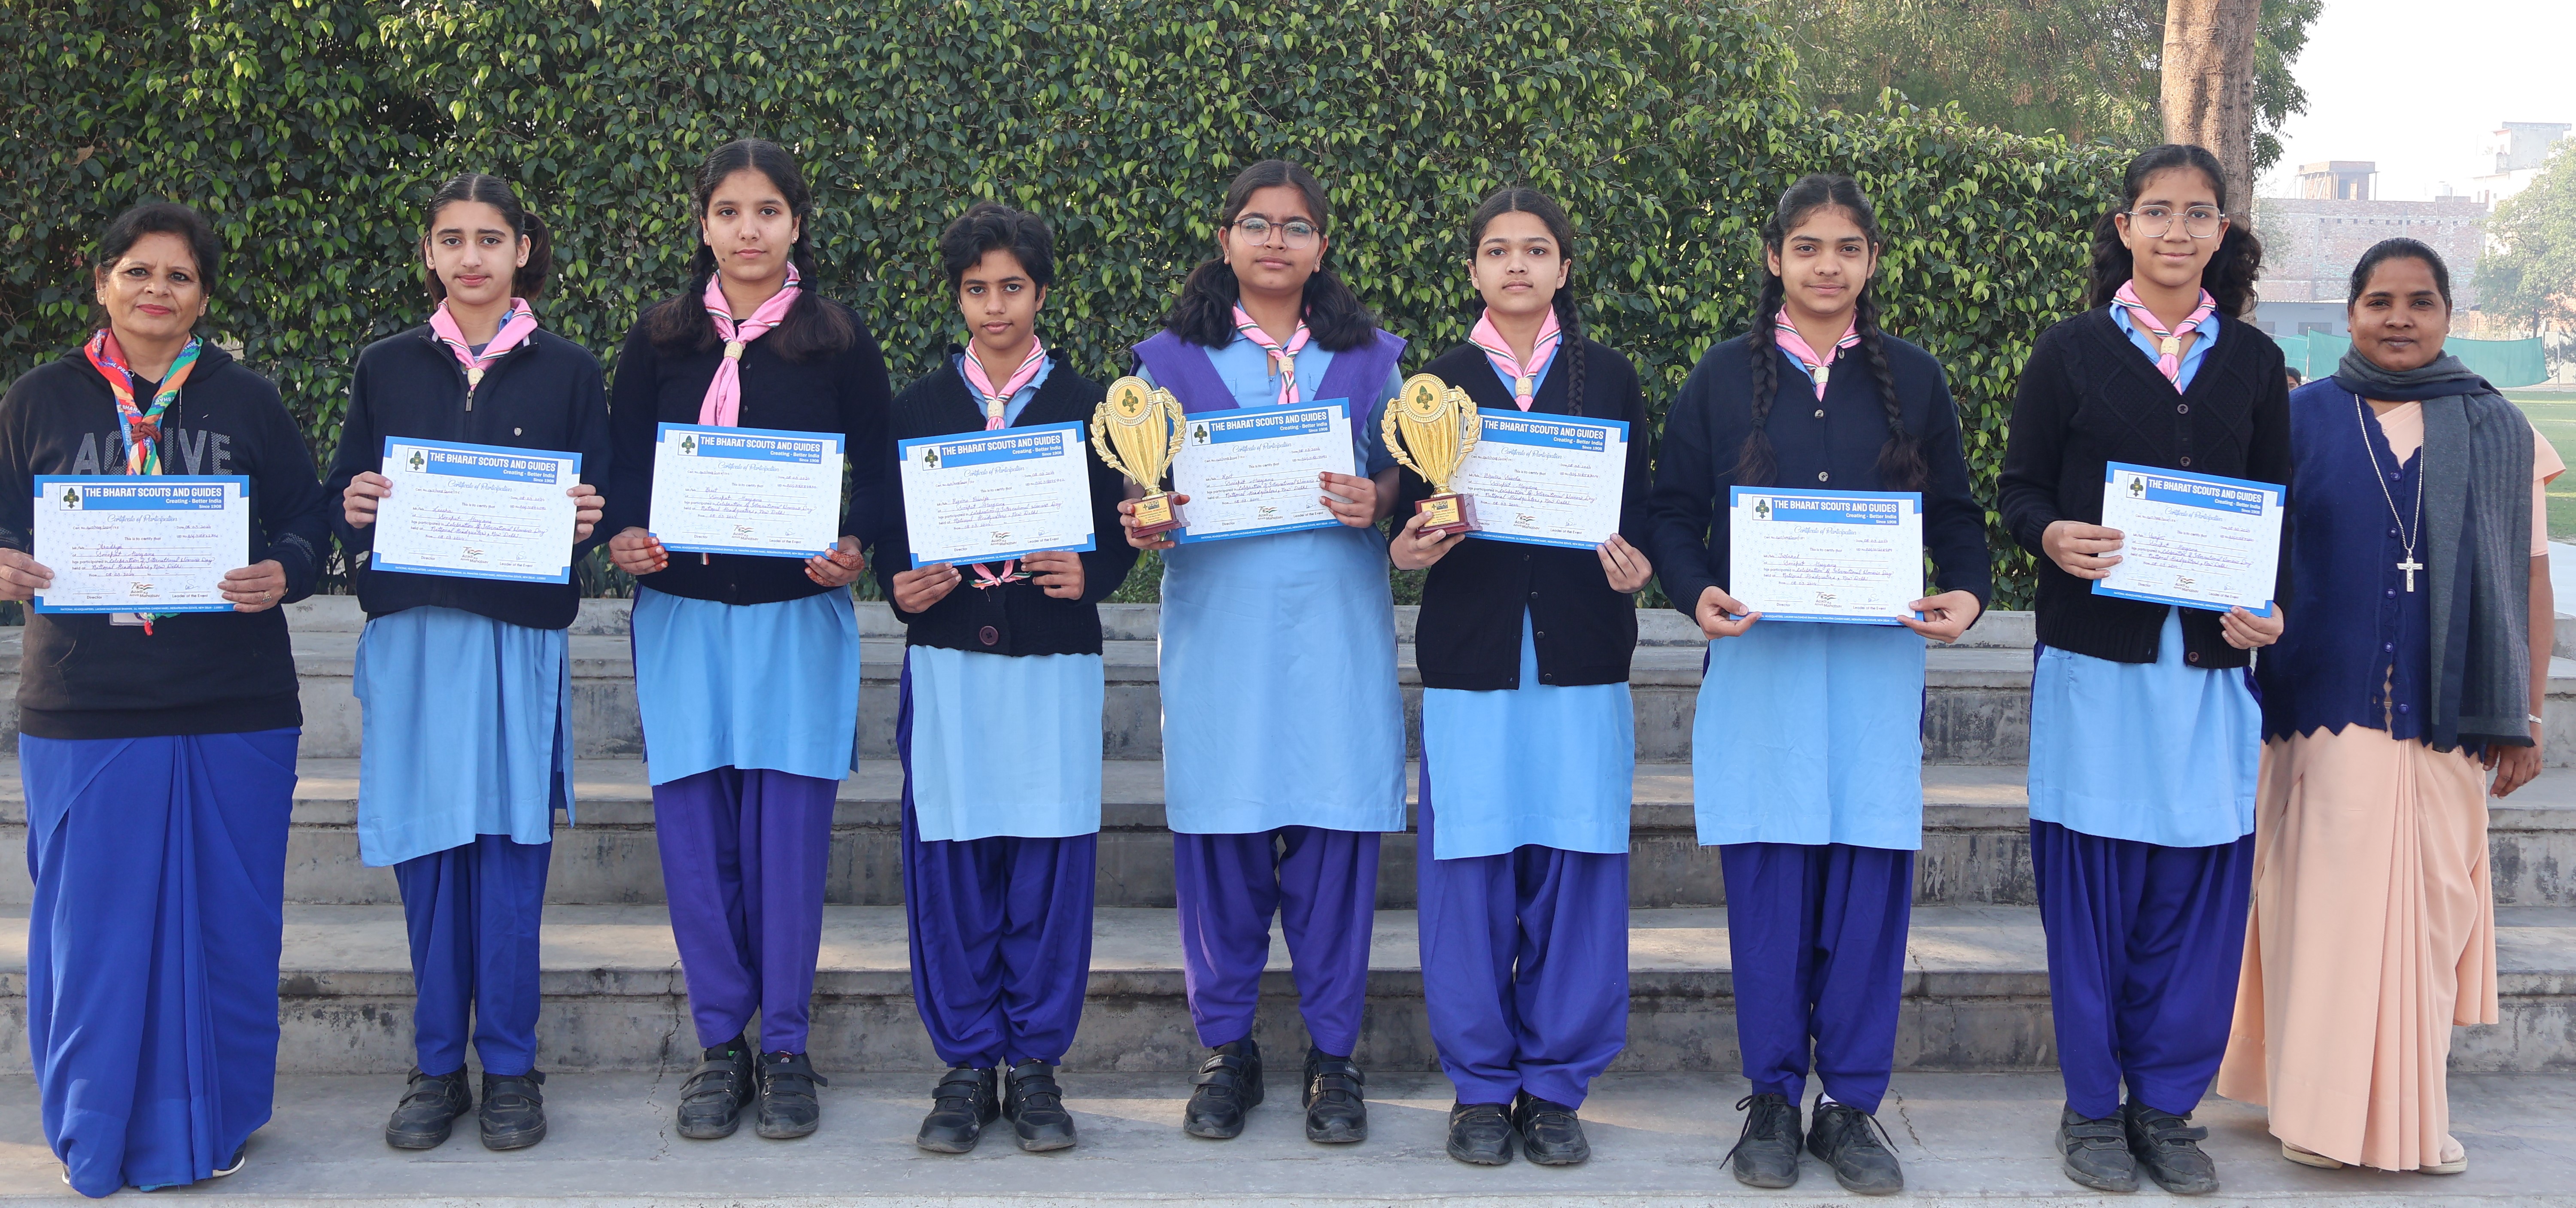 BHARAT SCOUTS & GUIDES INTERNATIONAL WOMEN'S DAY CELEBRATION COMPETITION WINNERS